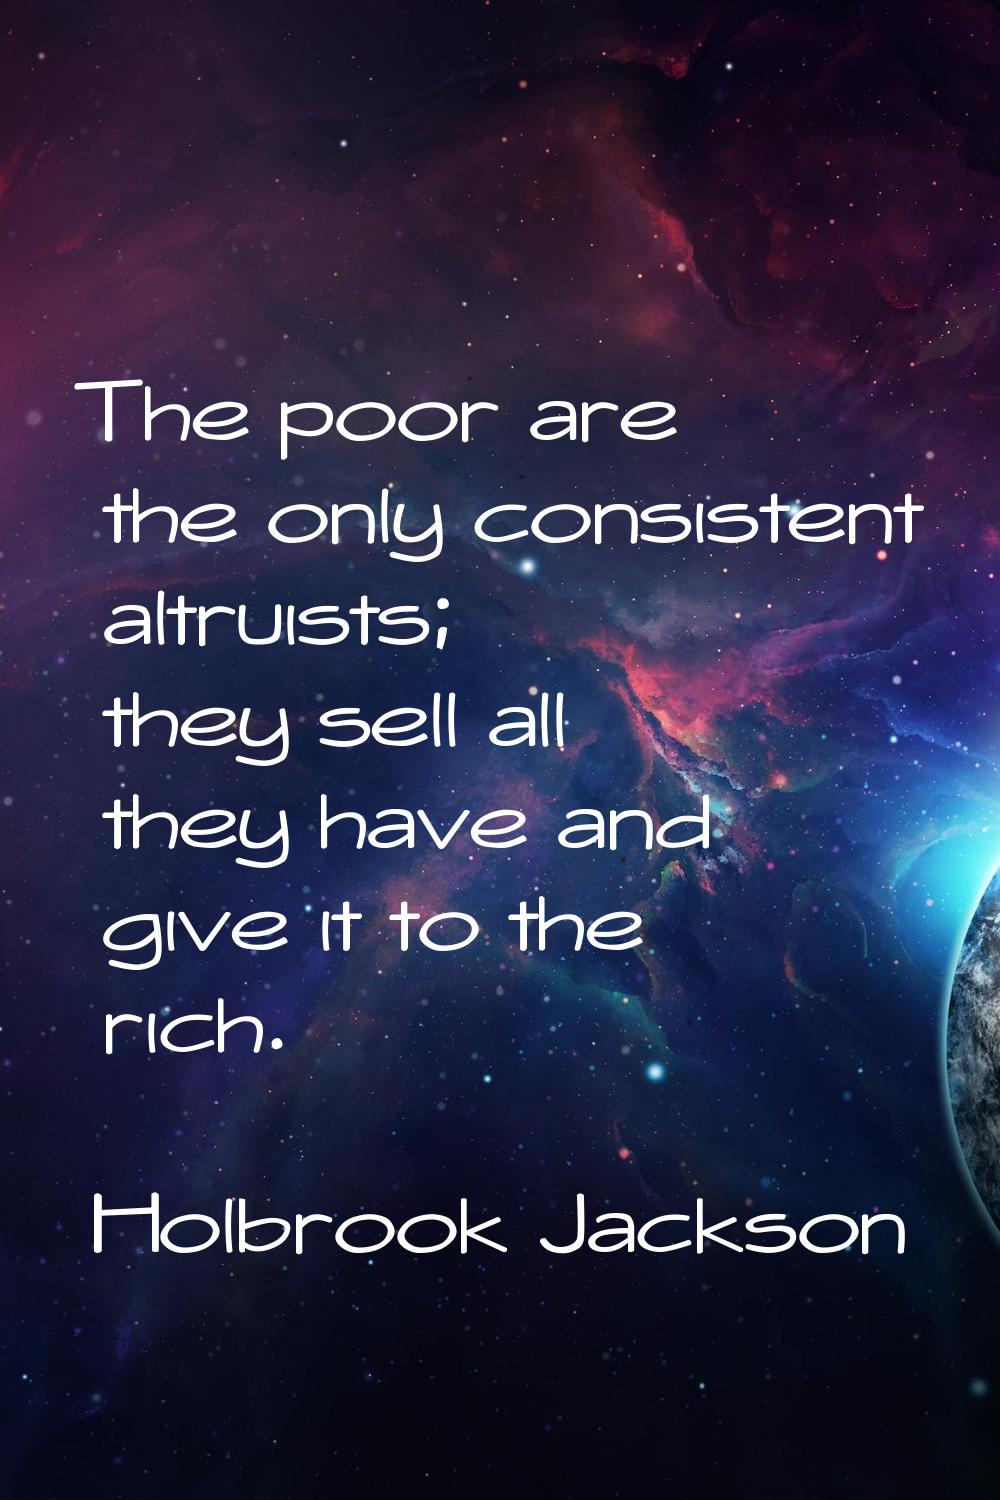 The poor are the only consistent altruists; they sell all they have and give it to the rich.